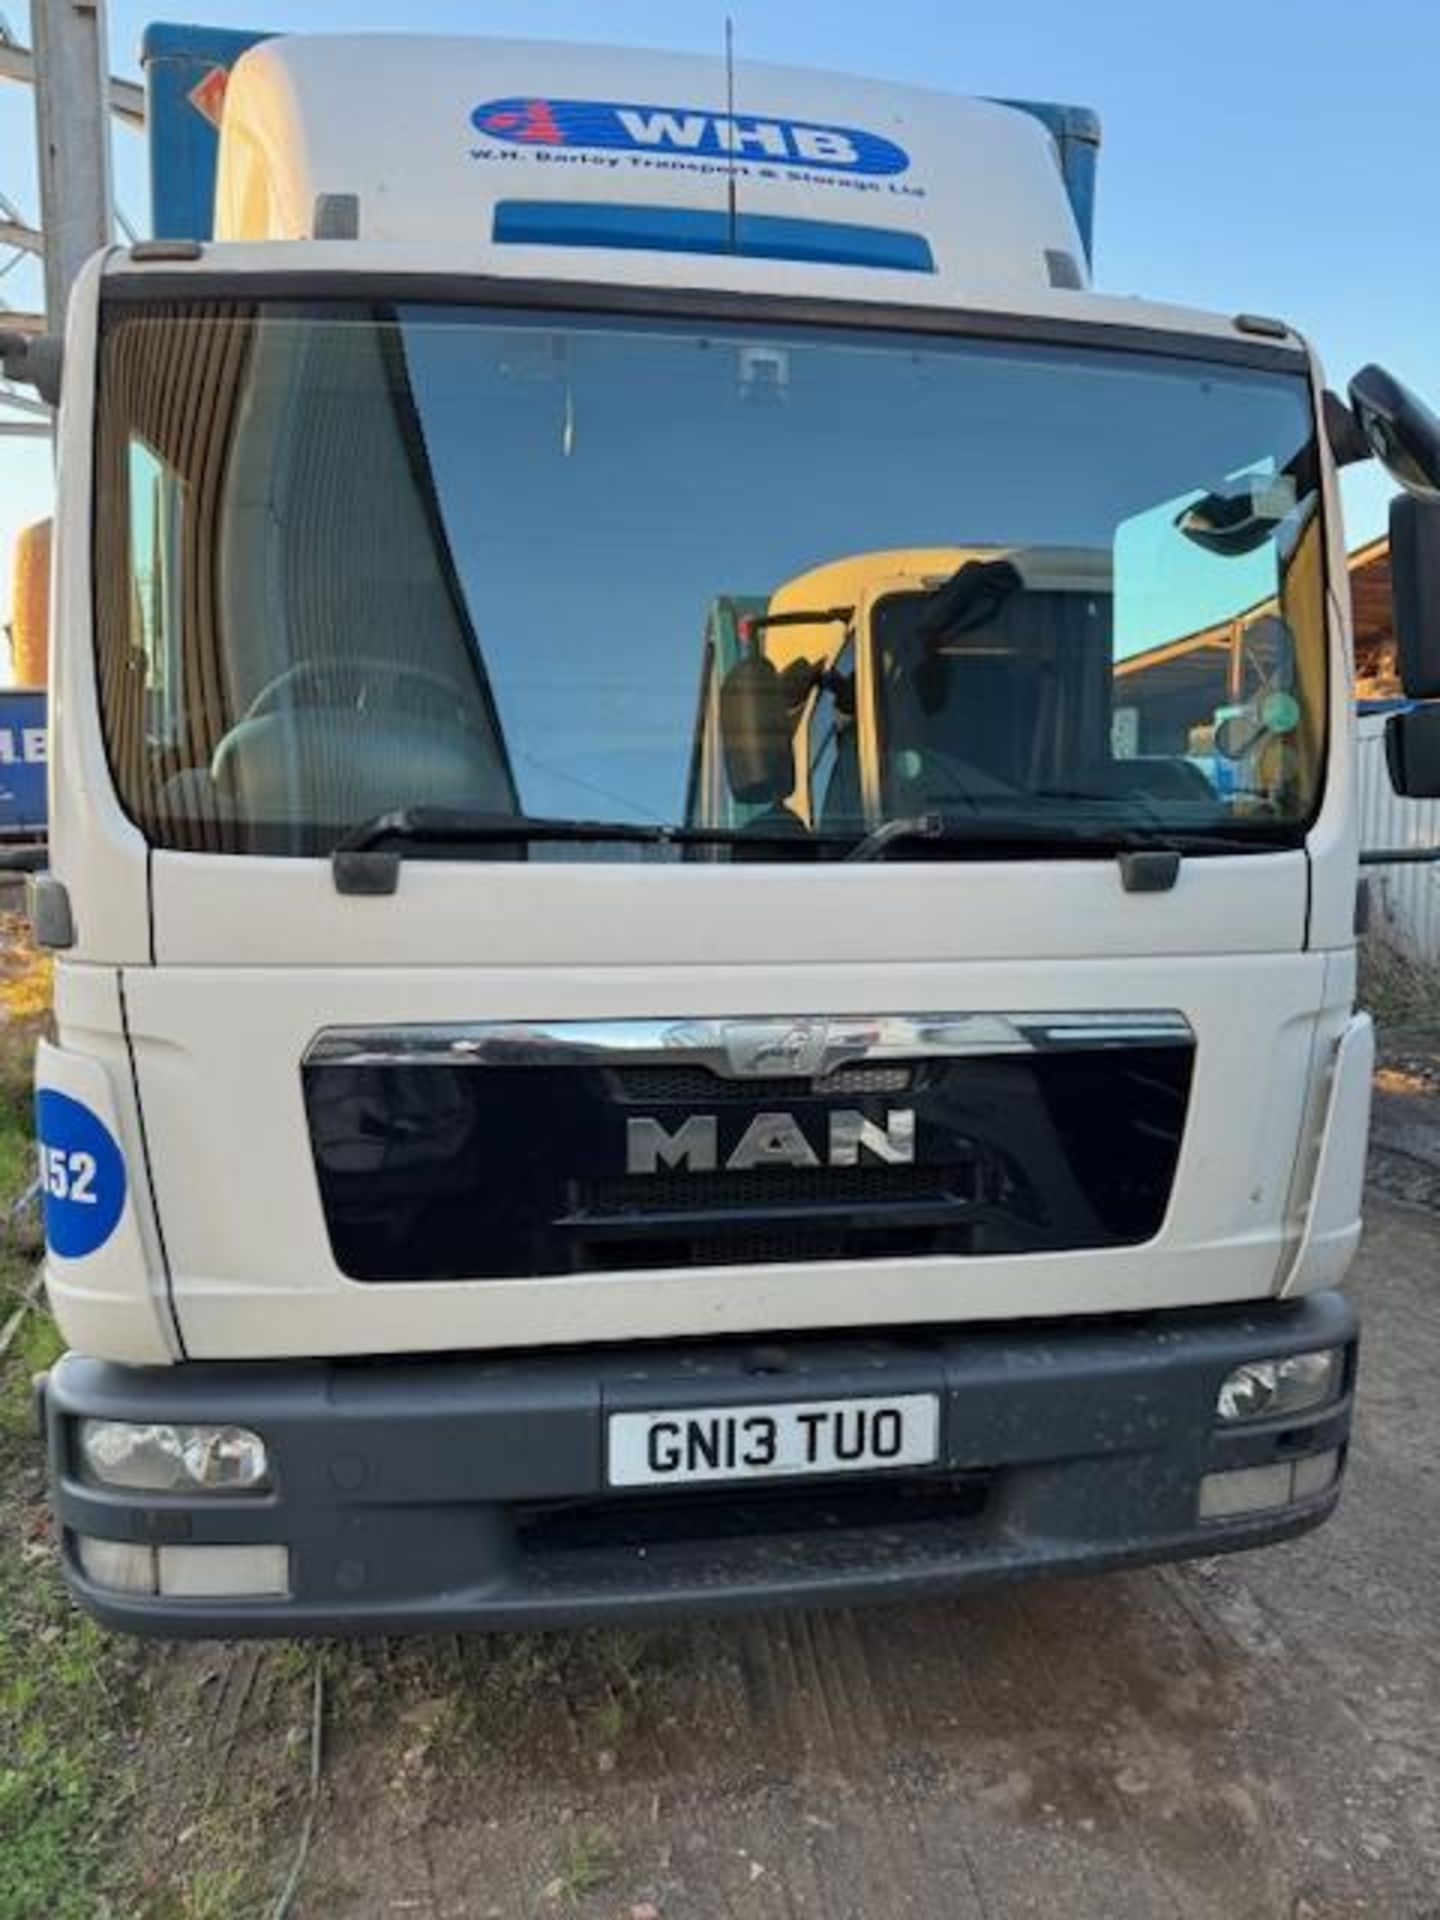 MAN euro 5 12t curtainside lorry with foldaway tail lift - Image 2 of 10